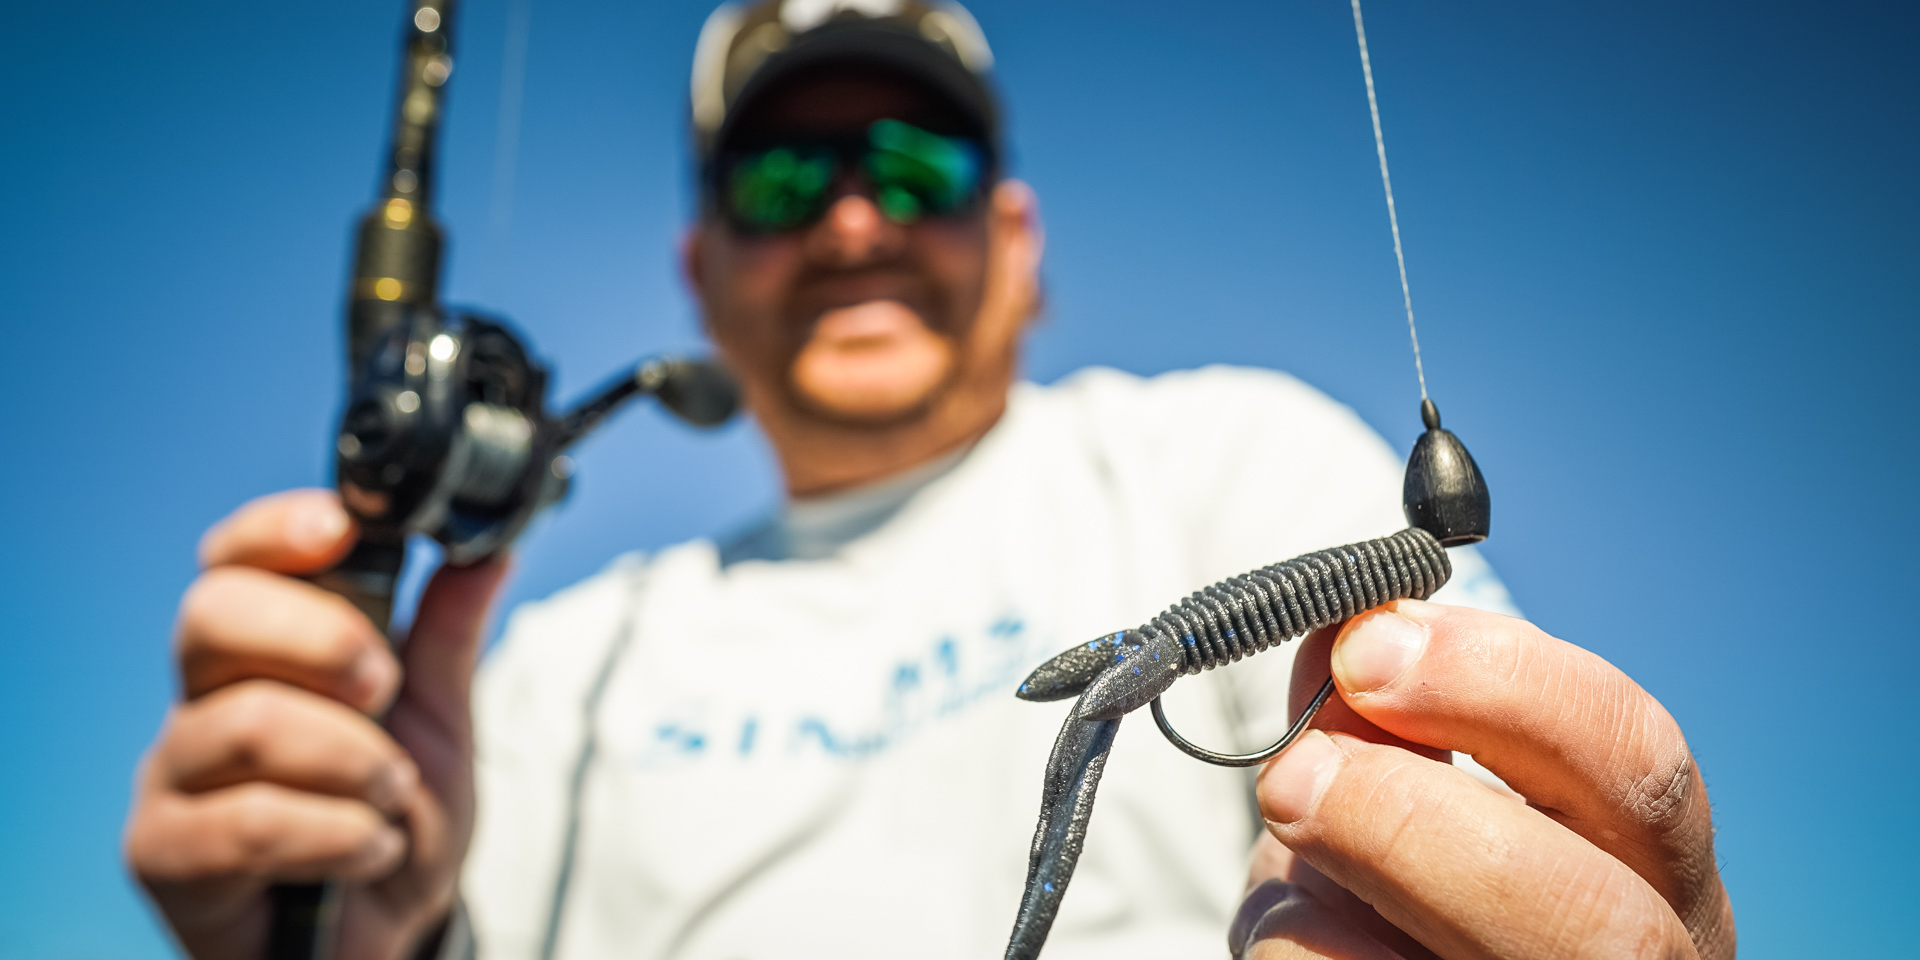 New Gear Guide: Berkley X5 and X9 Braided Fishing Line - Wide Open Spaces